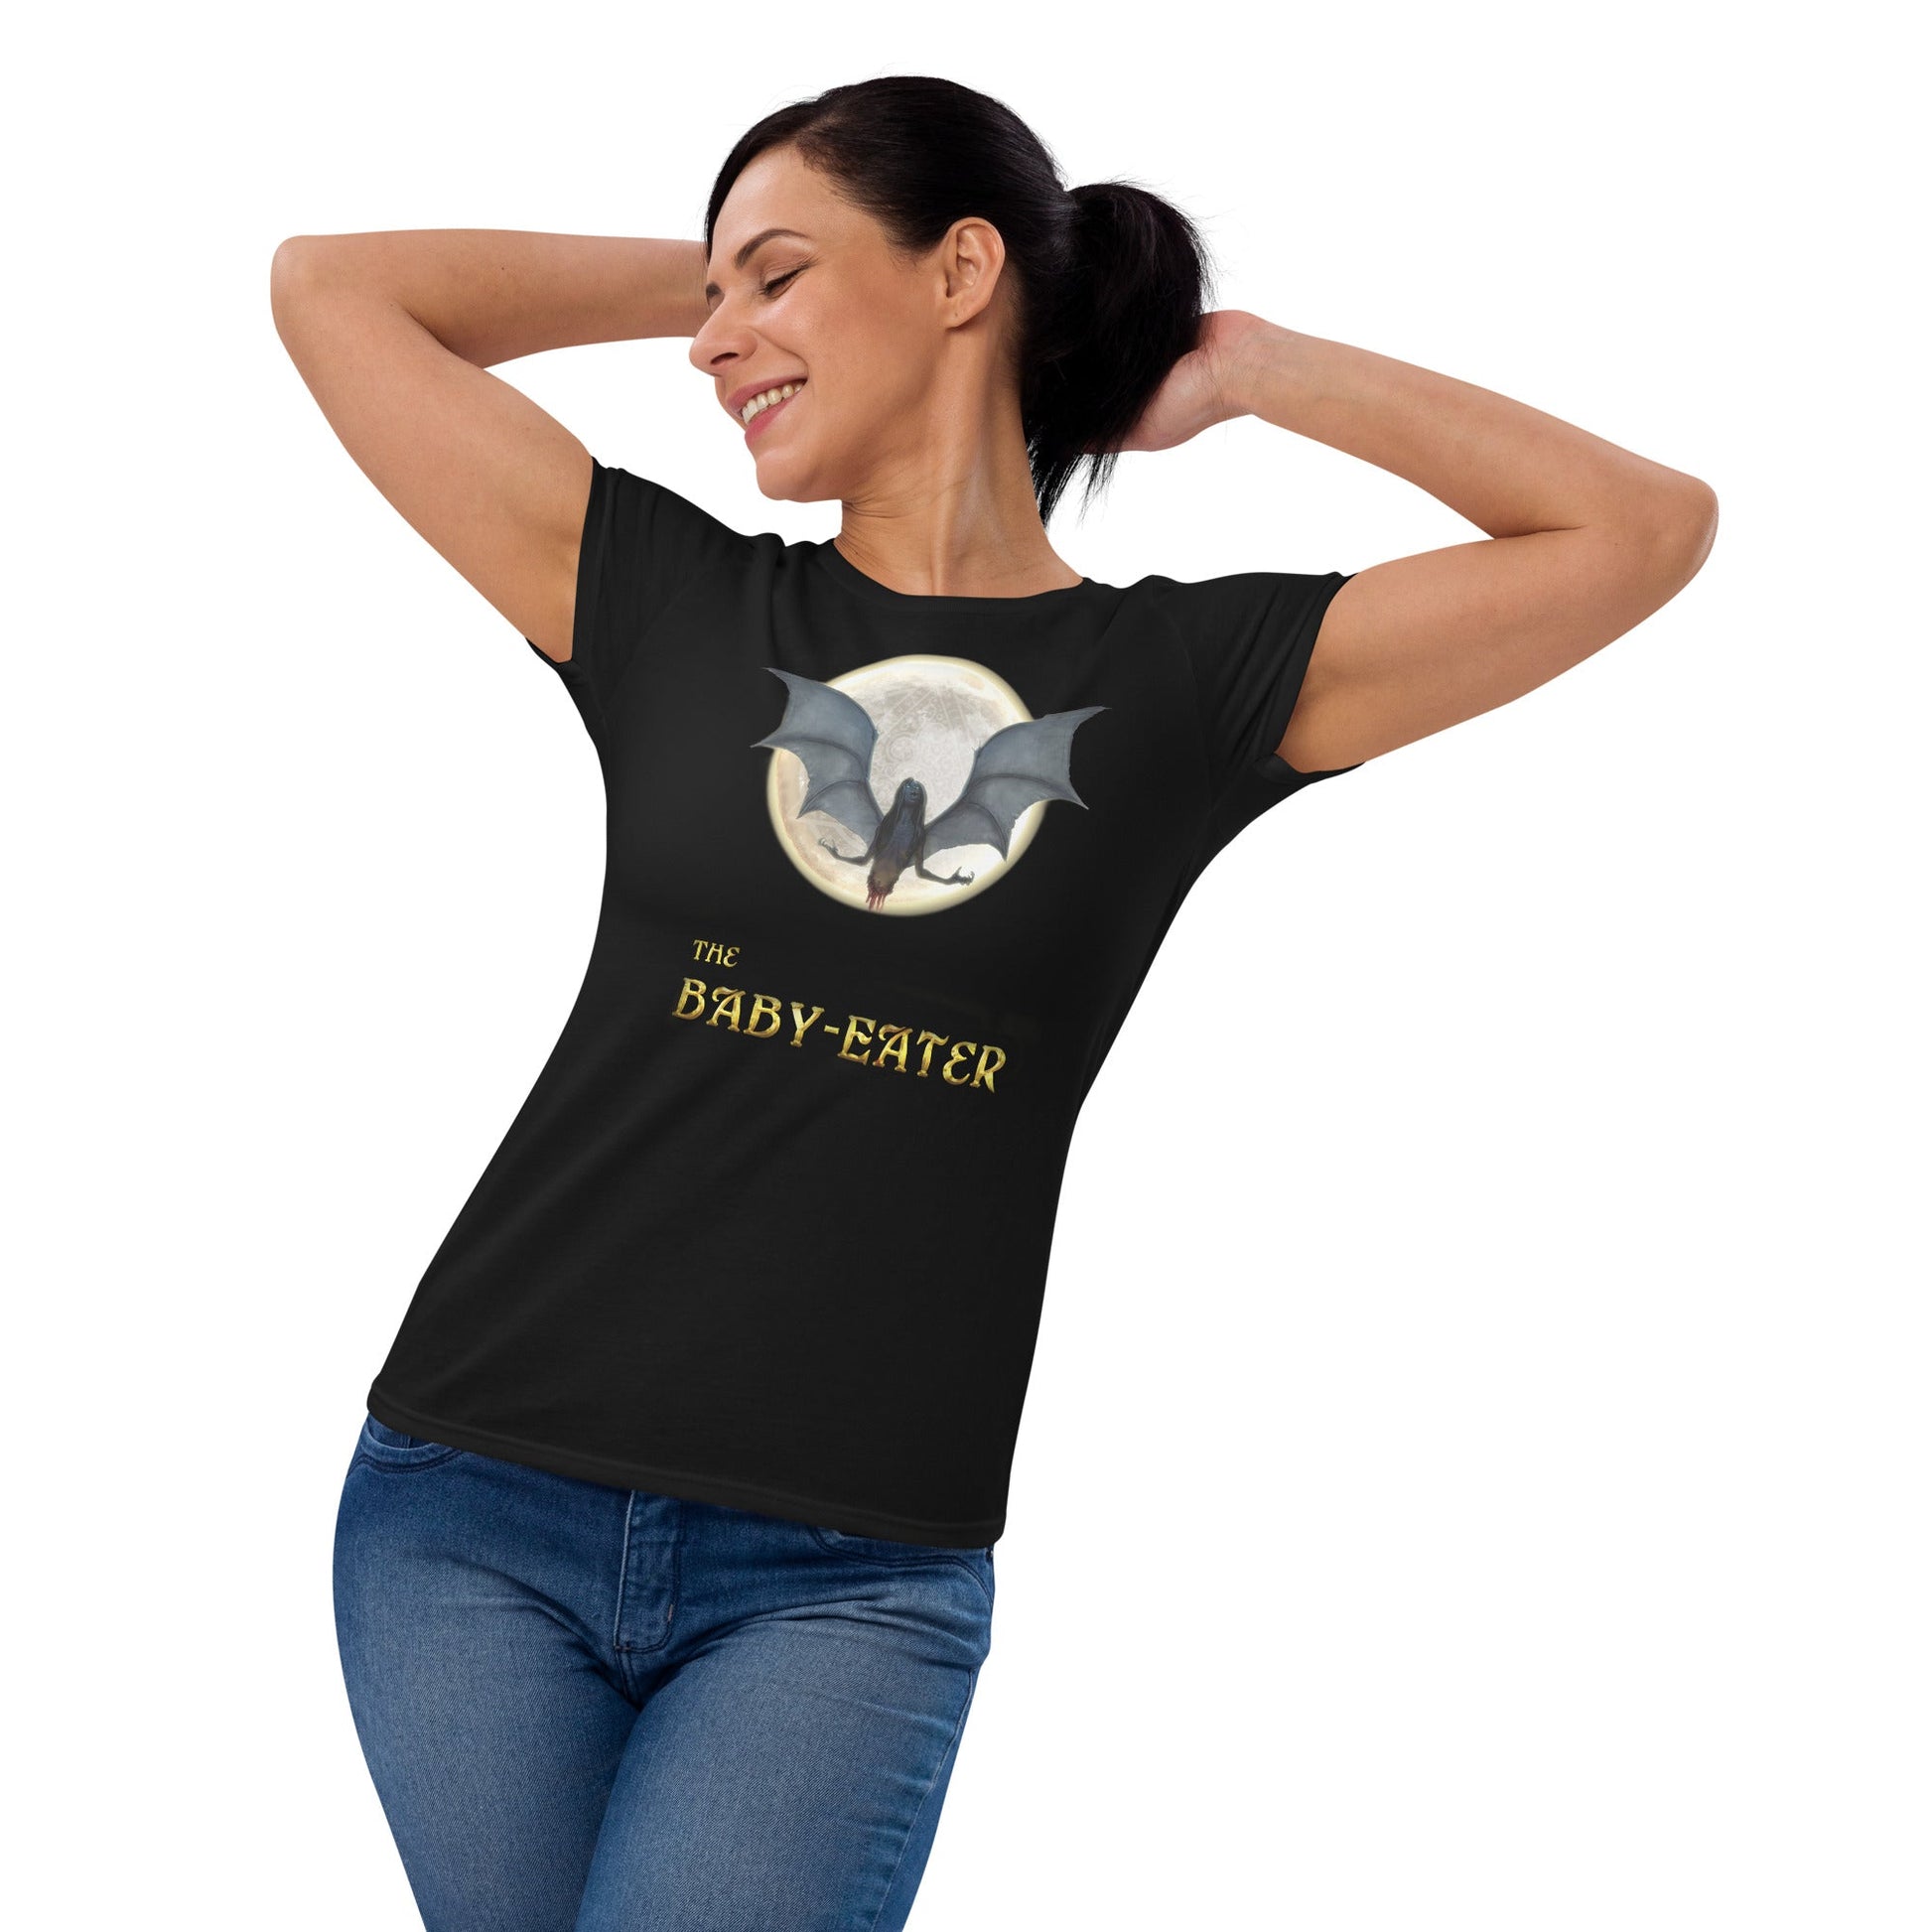 Women's Short-Sleeve Graphic T-Shirt | The Baby-Eater | Awards and Reviews - Spectral Ink Shop - Shirts & Tops -8953668_4937